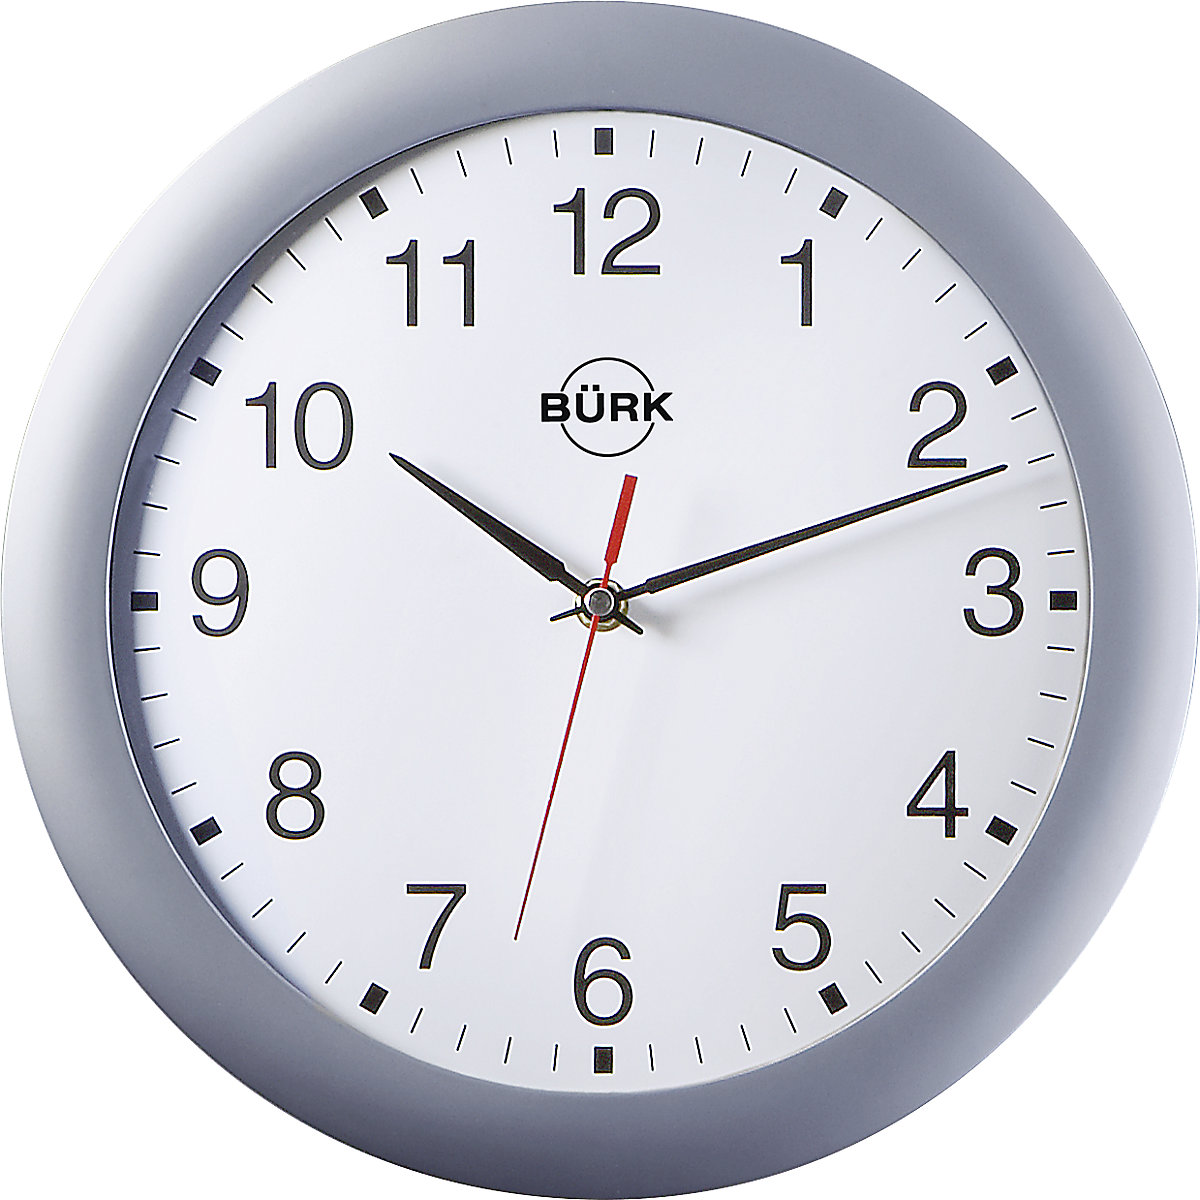 Wall clock made of ABS plastic, Ø 300 mm